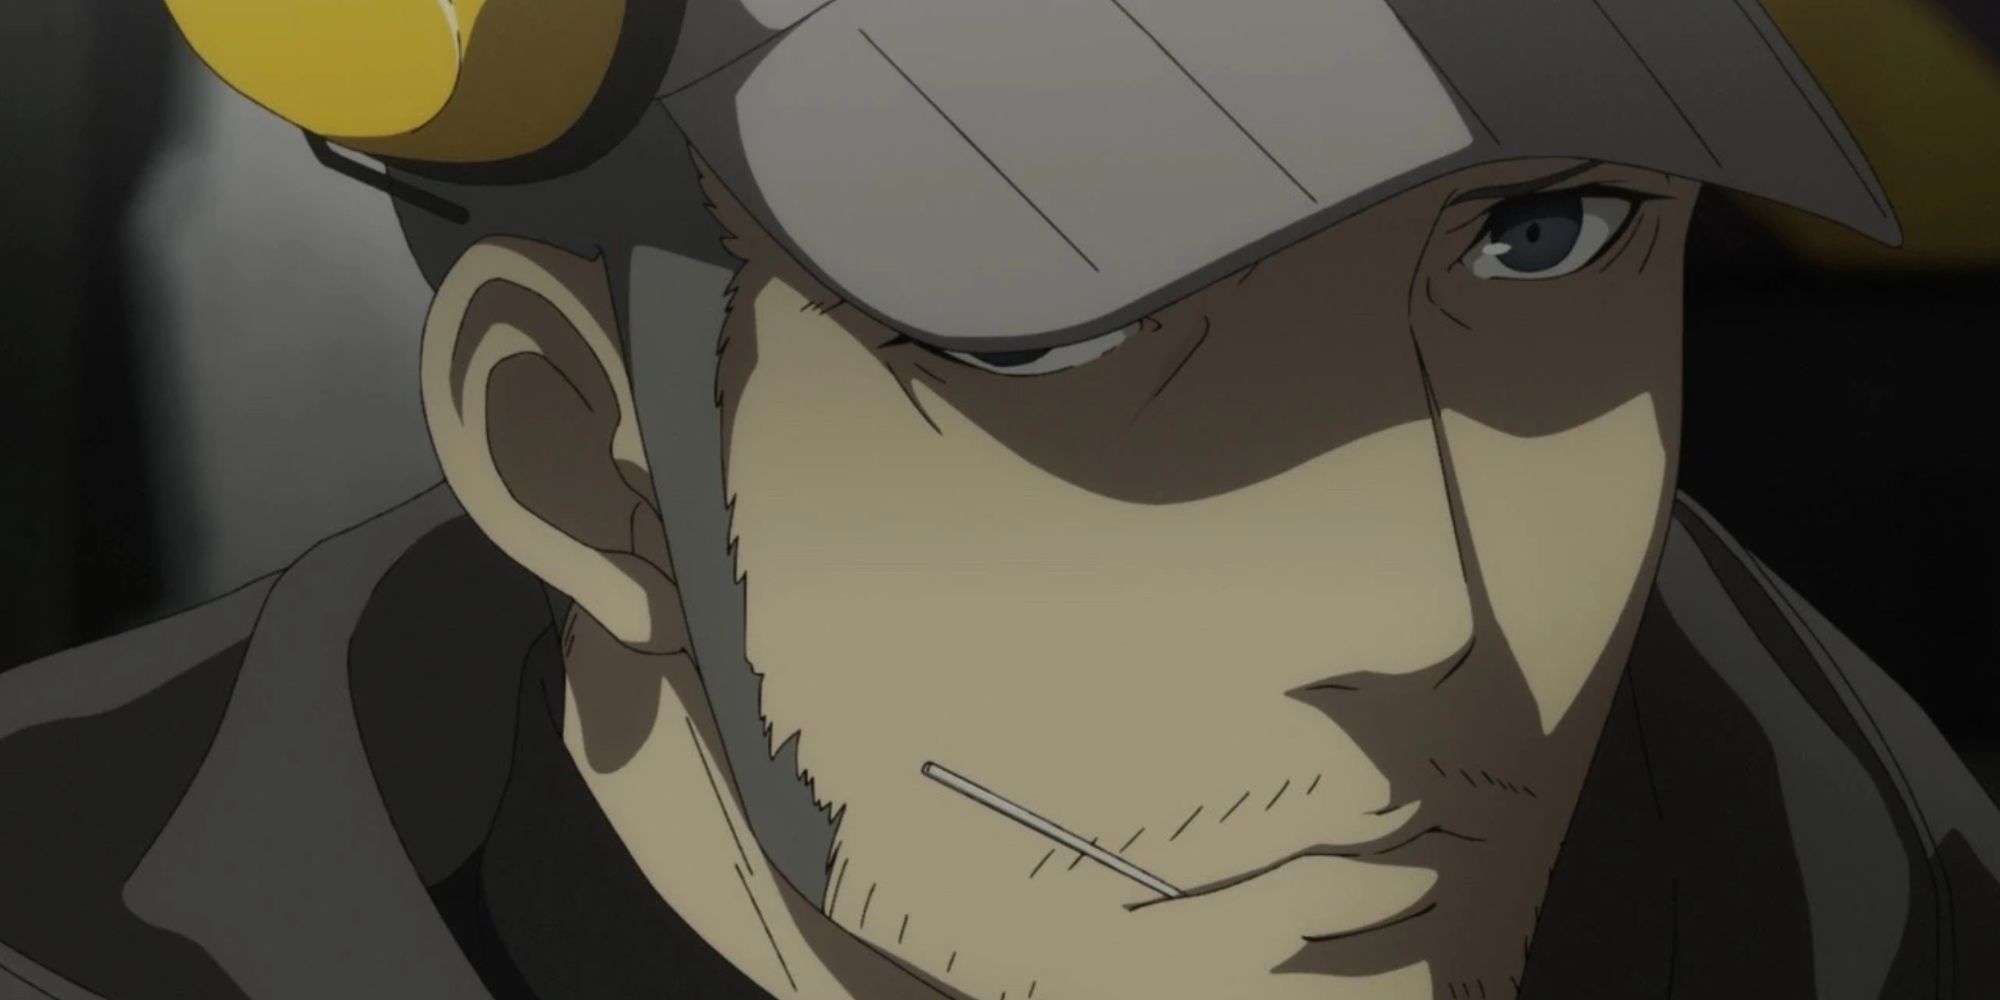 Iwai Looking Forward With A Cap Over An Eye